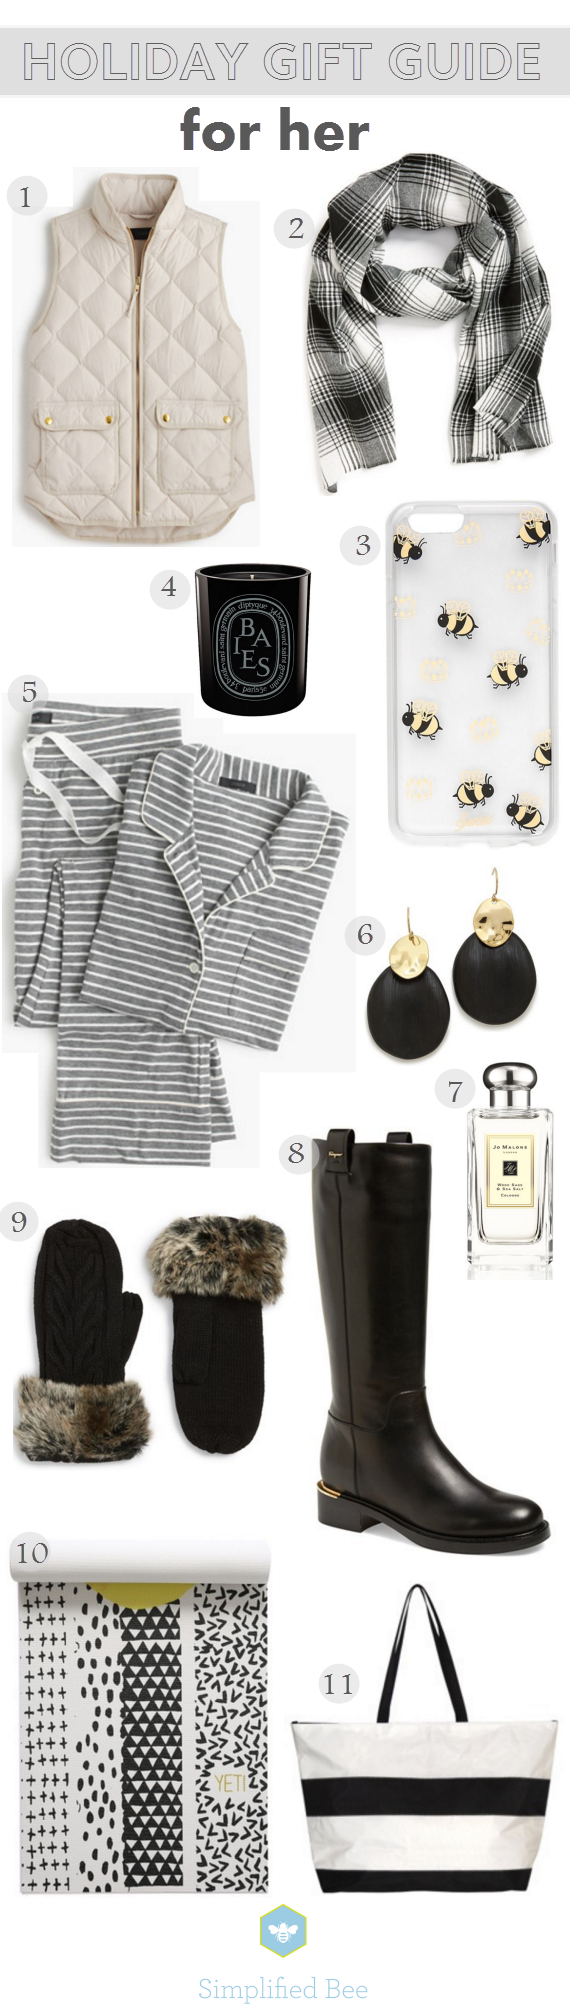 holiday gift guide 2015 for her // via @simplifiedbee #holiday #gifts